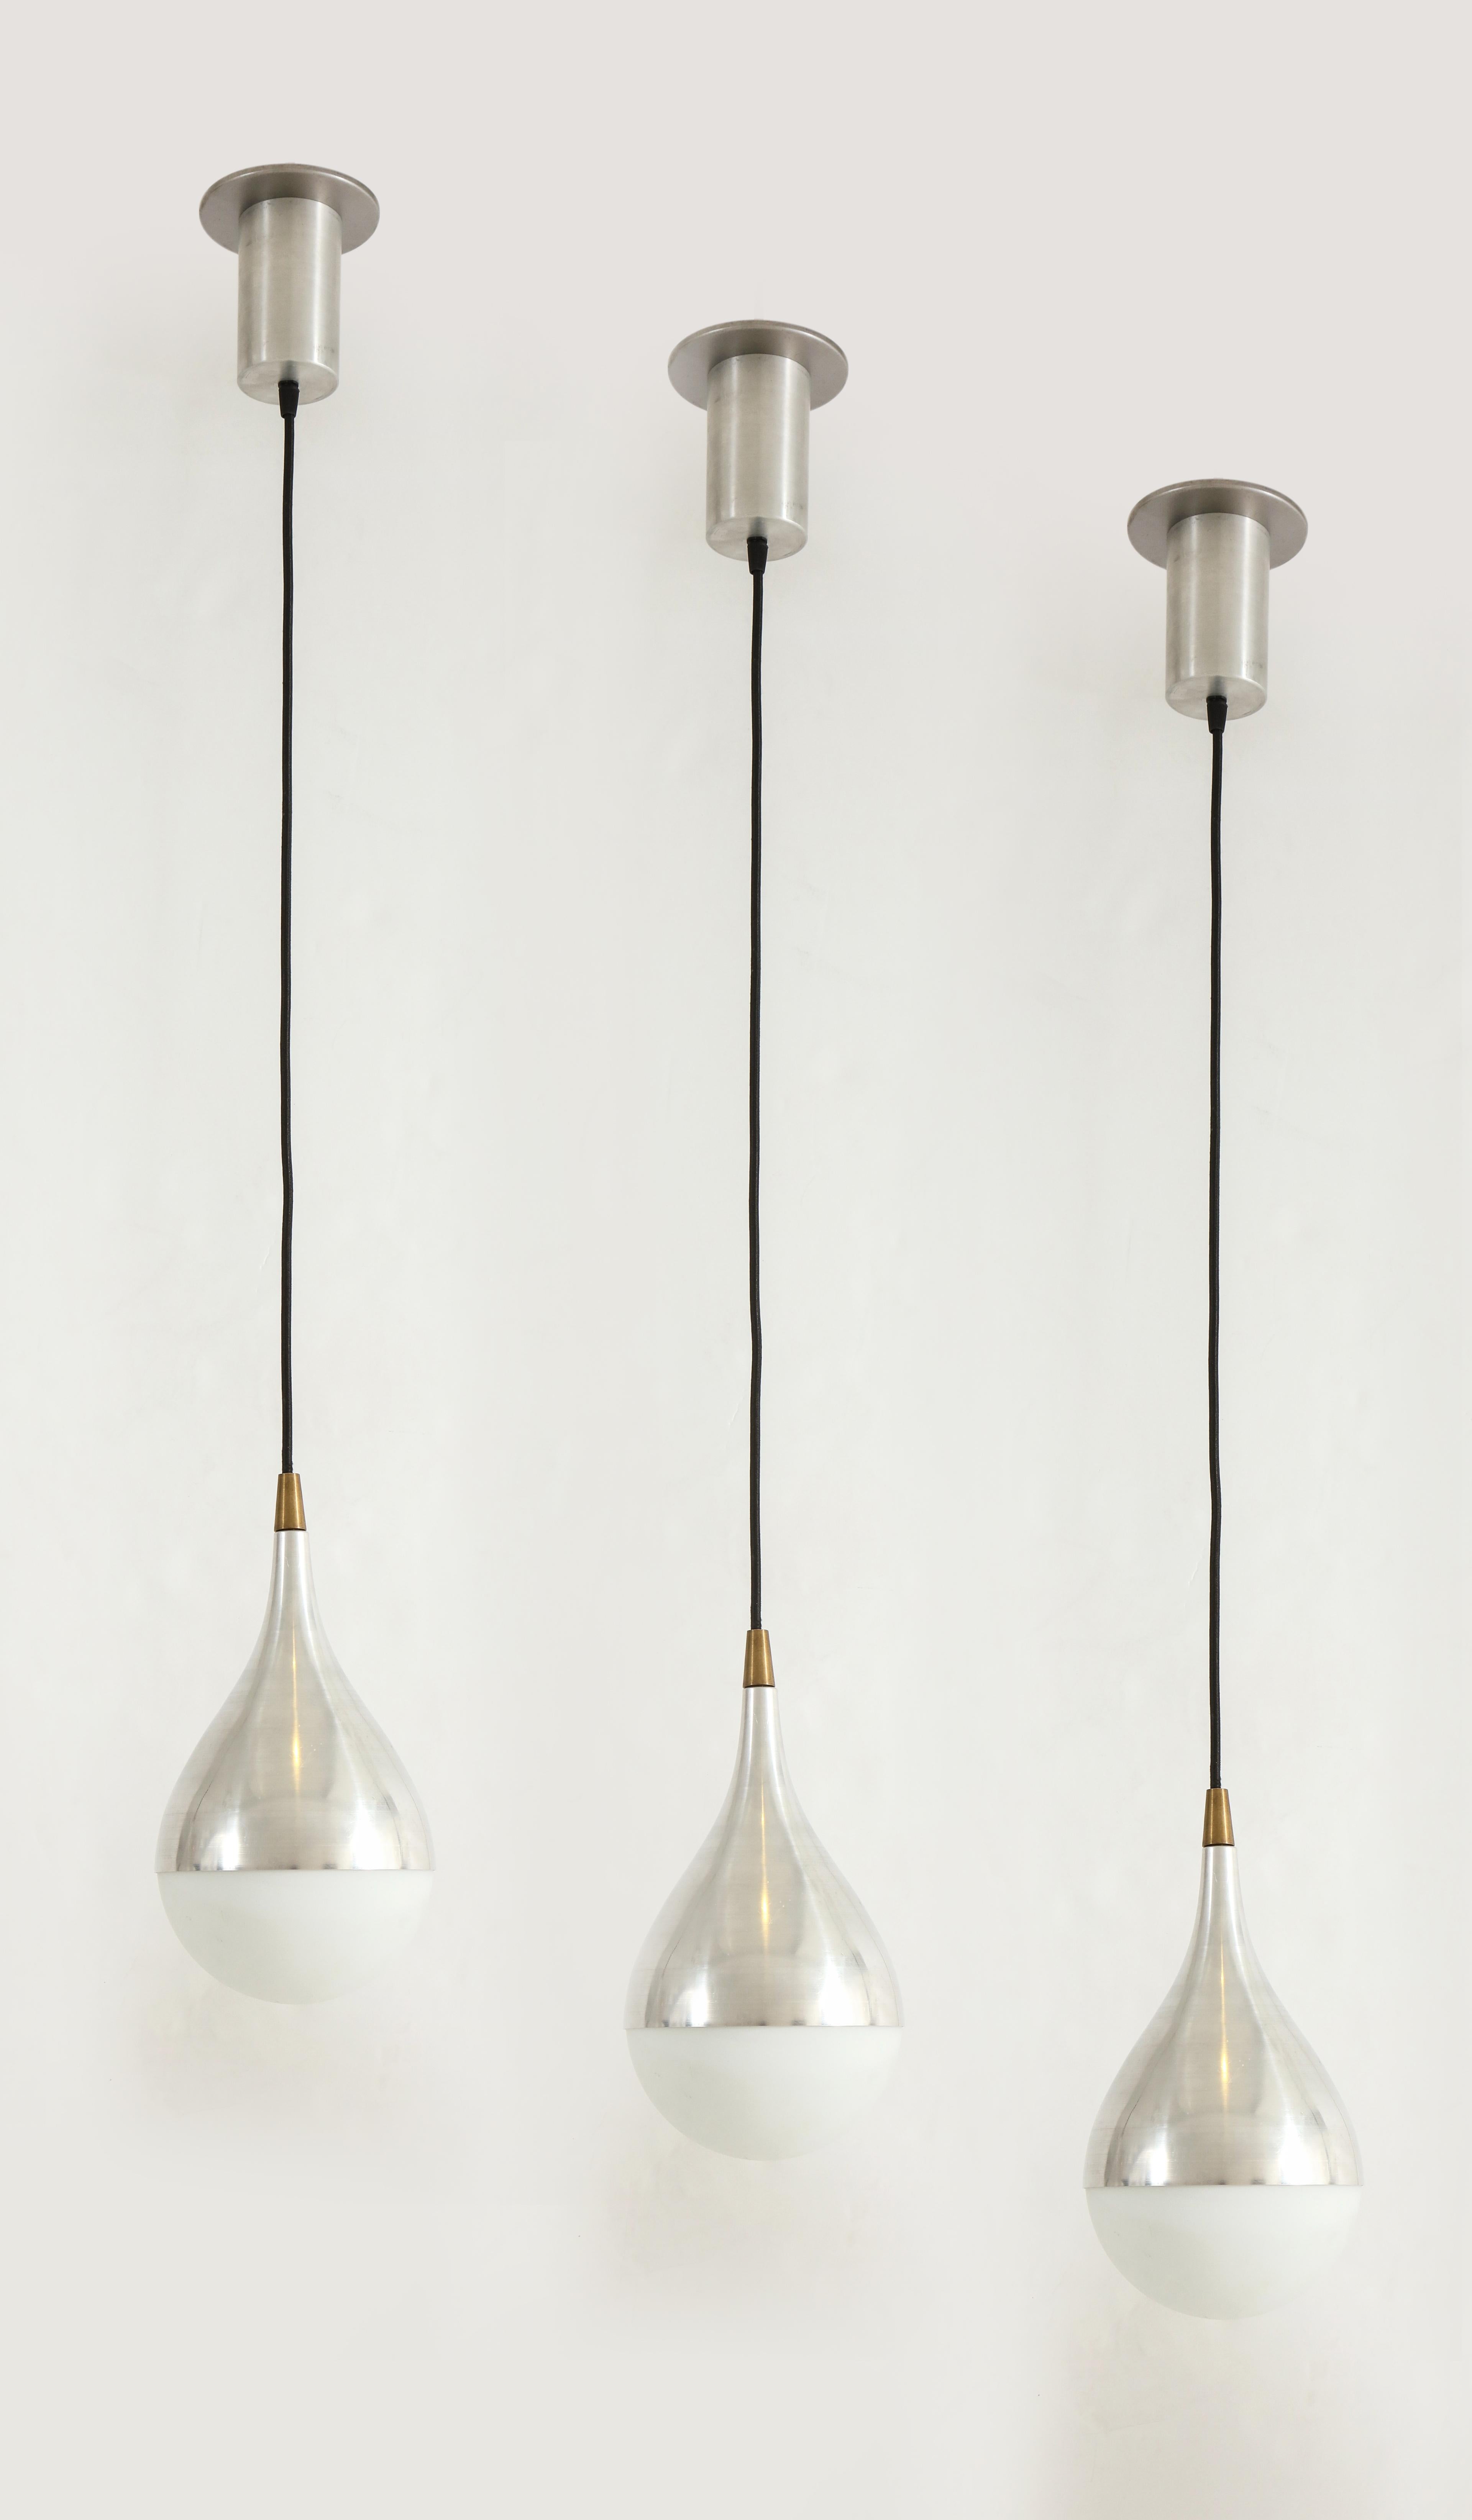 Set of three rare pendants each with opaline glass globe shades held by brushed aluminum and brass fittings suspended by cable and original brushed aluminum canopy. This iconic Stilnovo model displays an elegantly simple teardrop shape.  Its